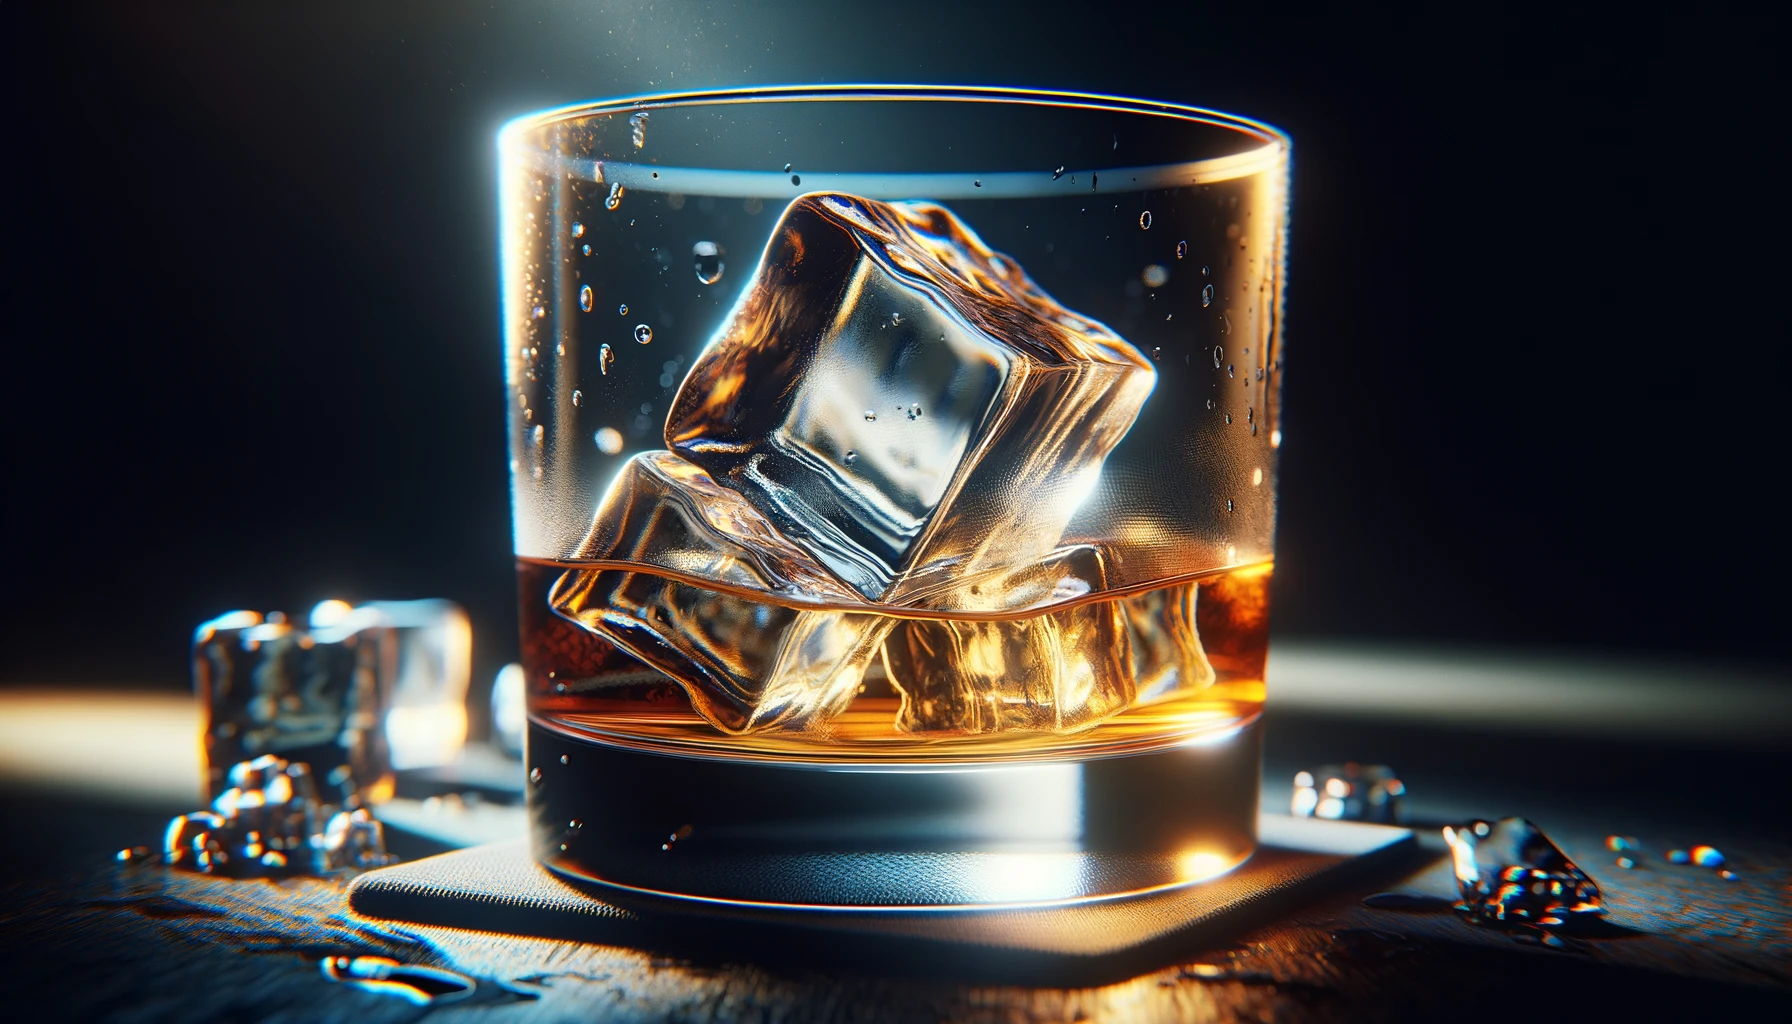 Cubes of ice in a whiskey glass against a dark background